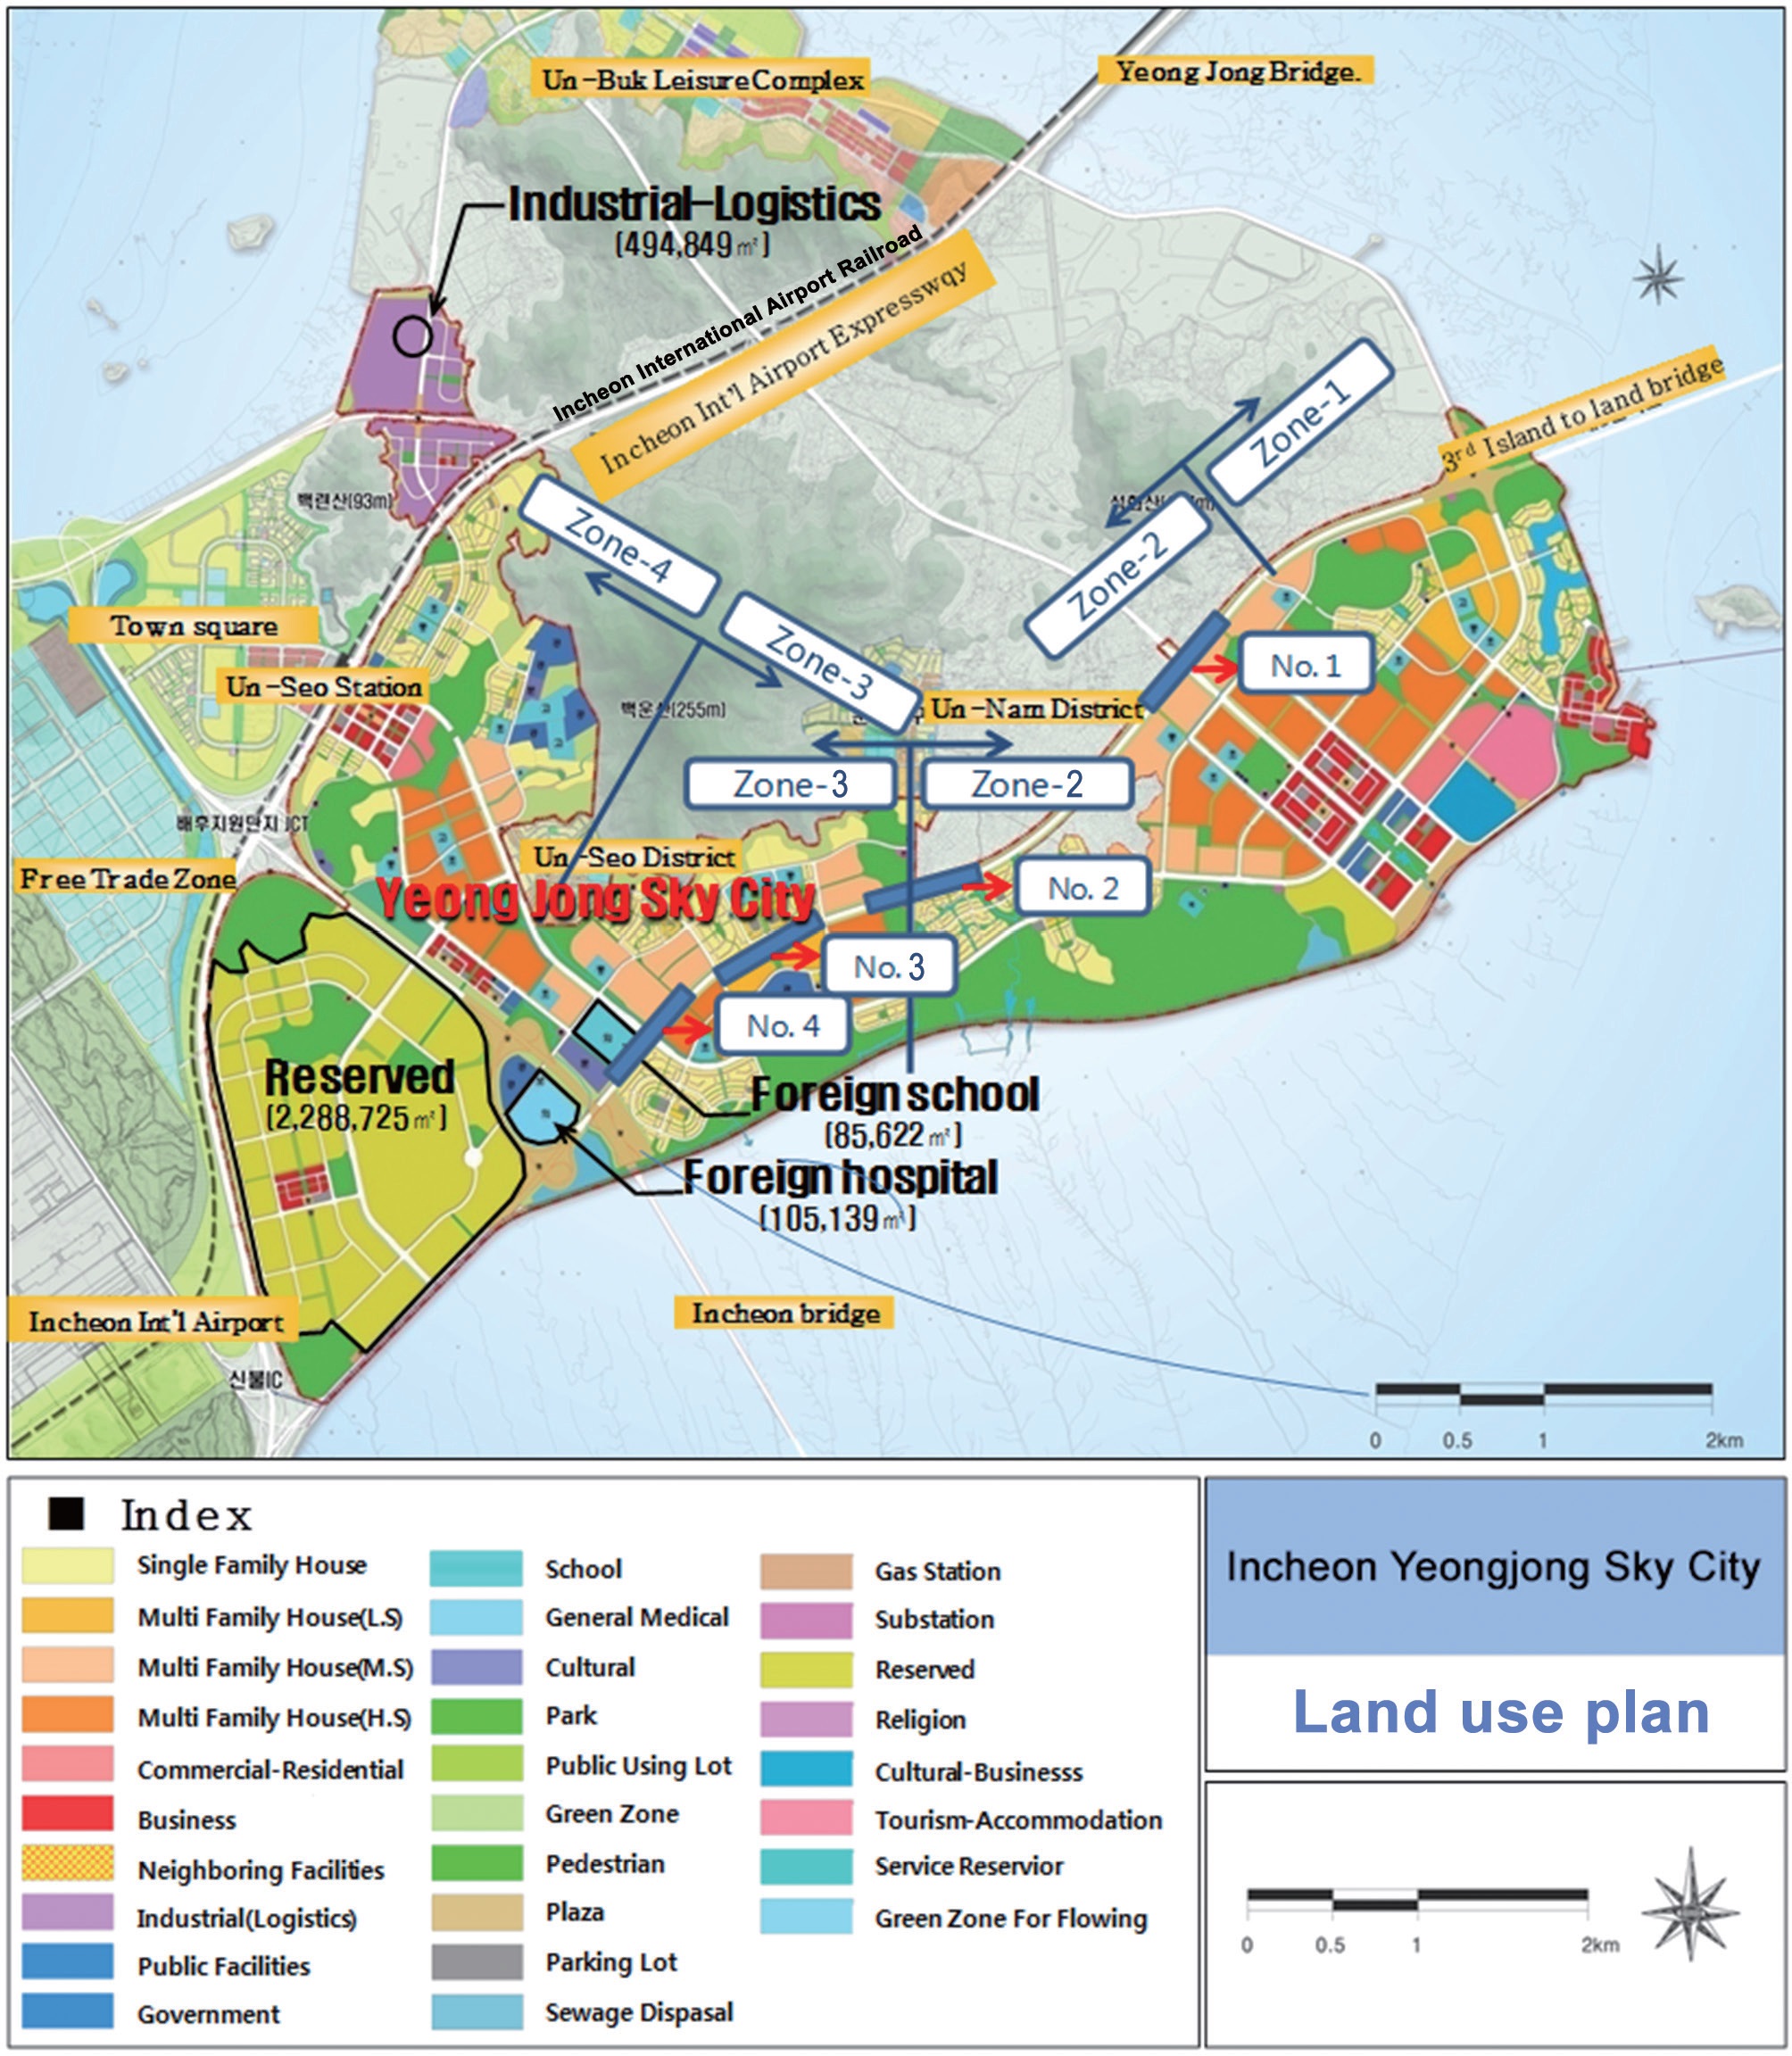 Land use and installation plan for structures in Yeongjong Sky City business district.